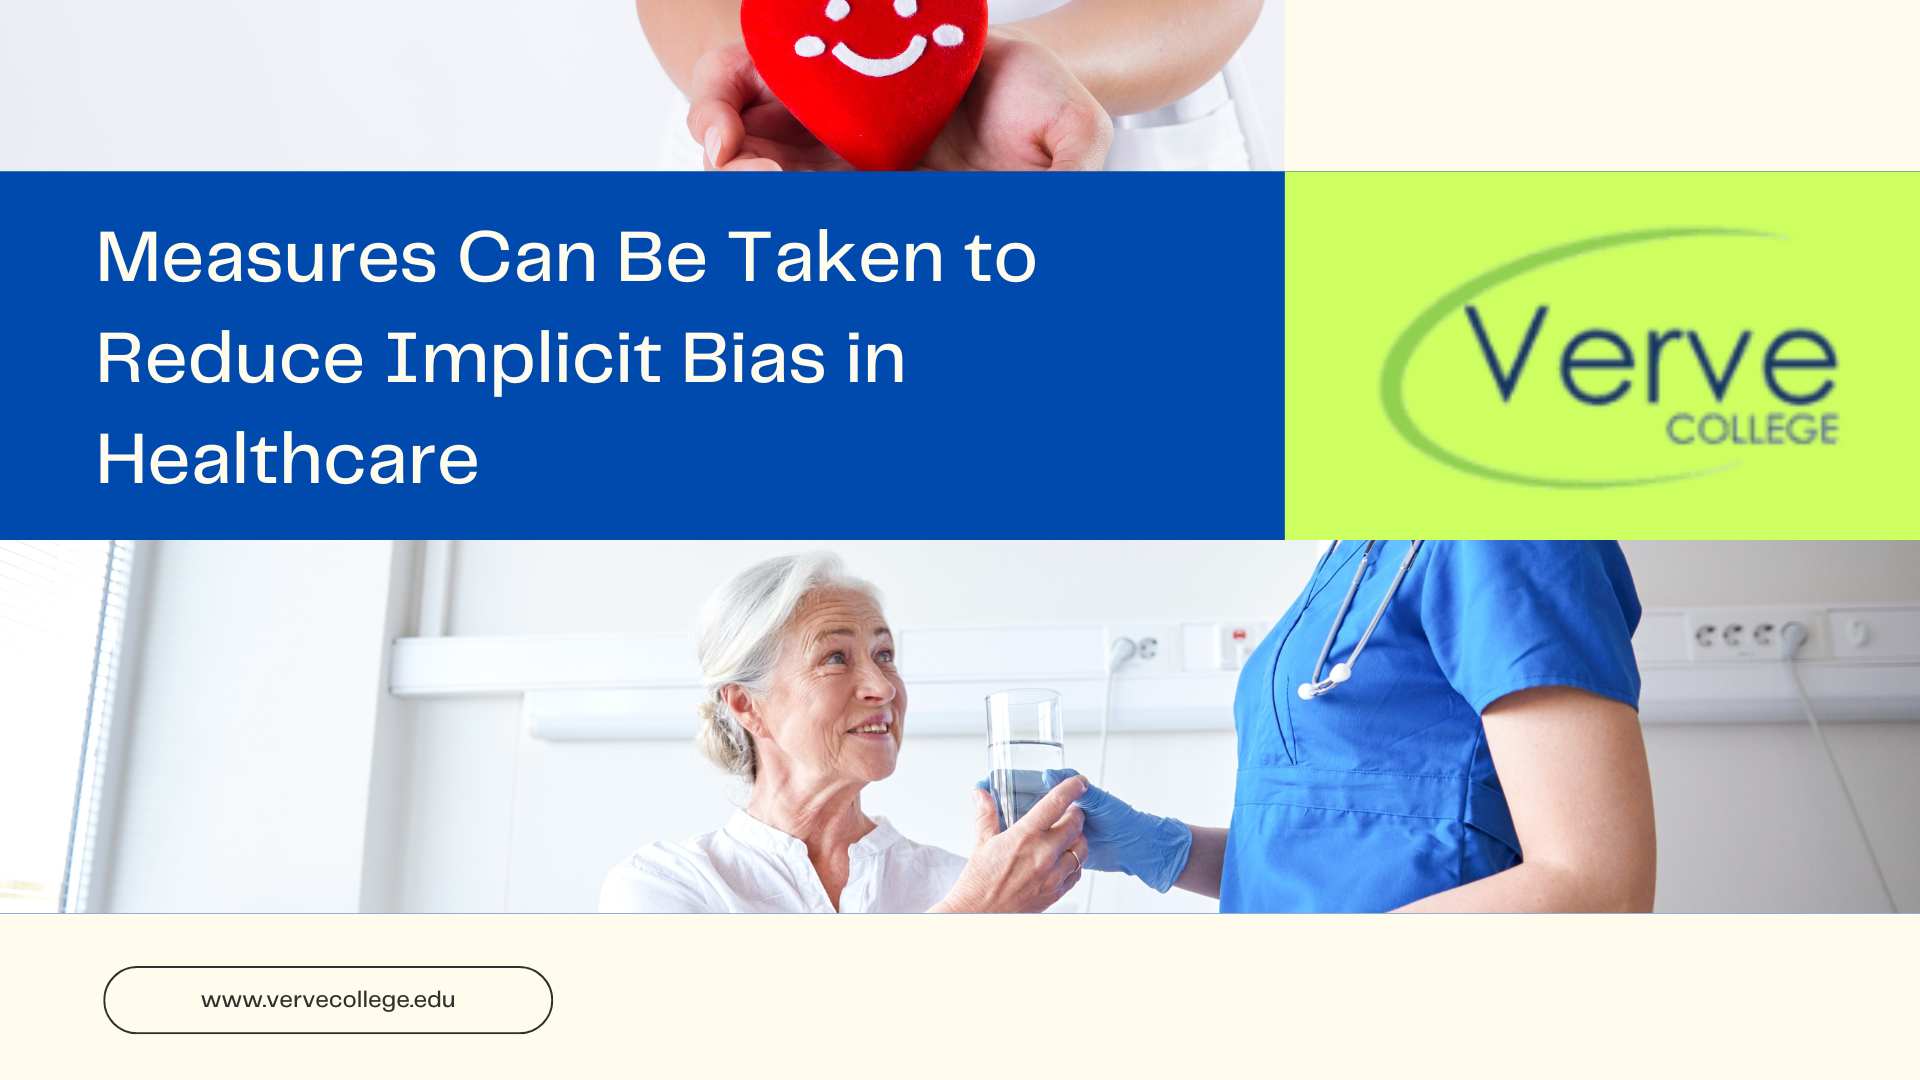 What Measures Can Be Taken to Reduce Implicit Bias in Healthcare?